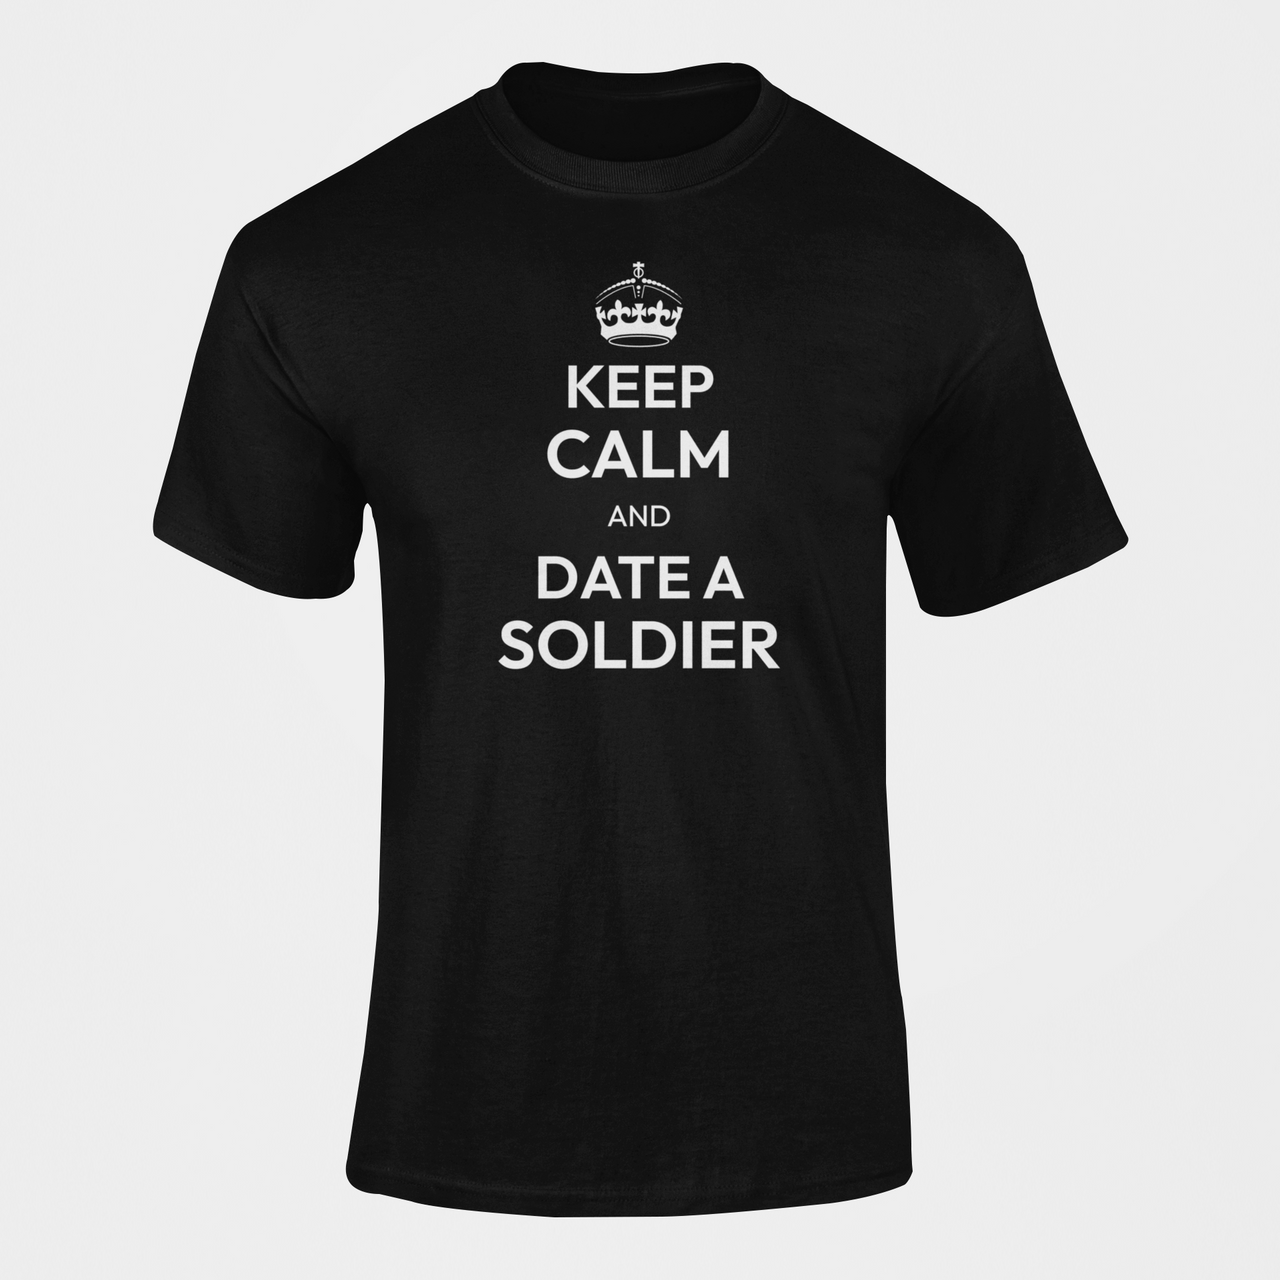 Military T-shirt - Keep Calm and Date a Soldier (Men)